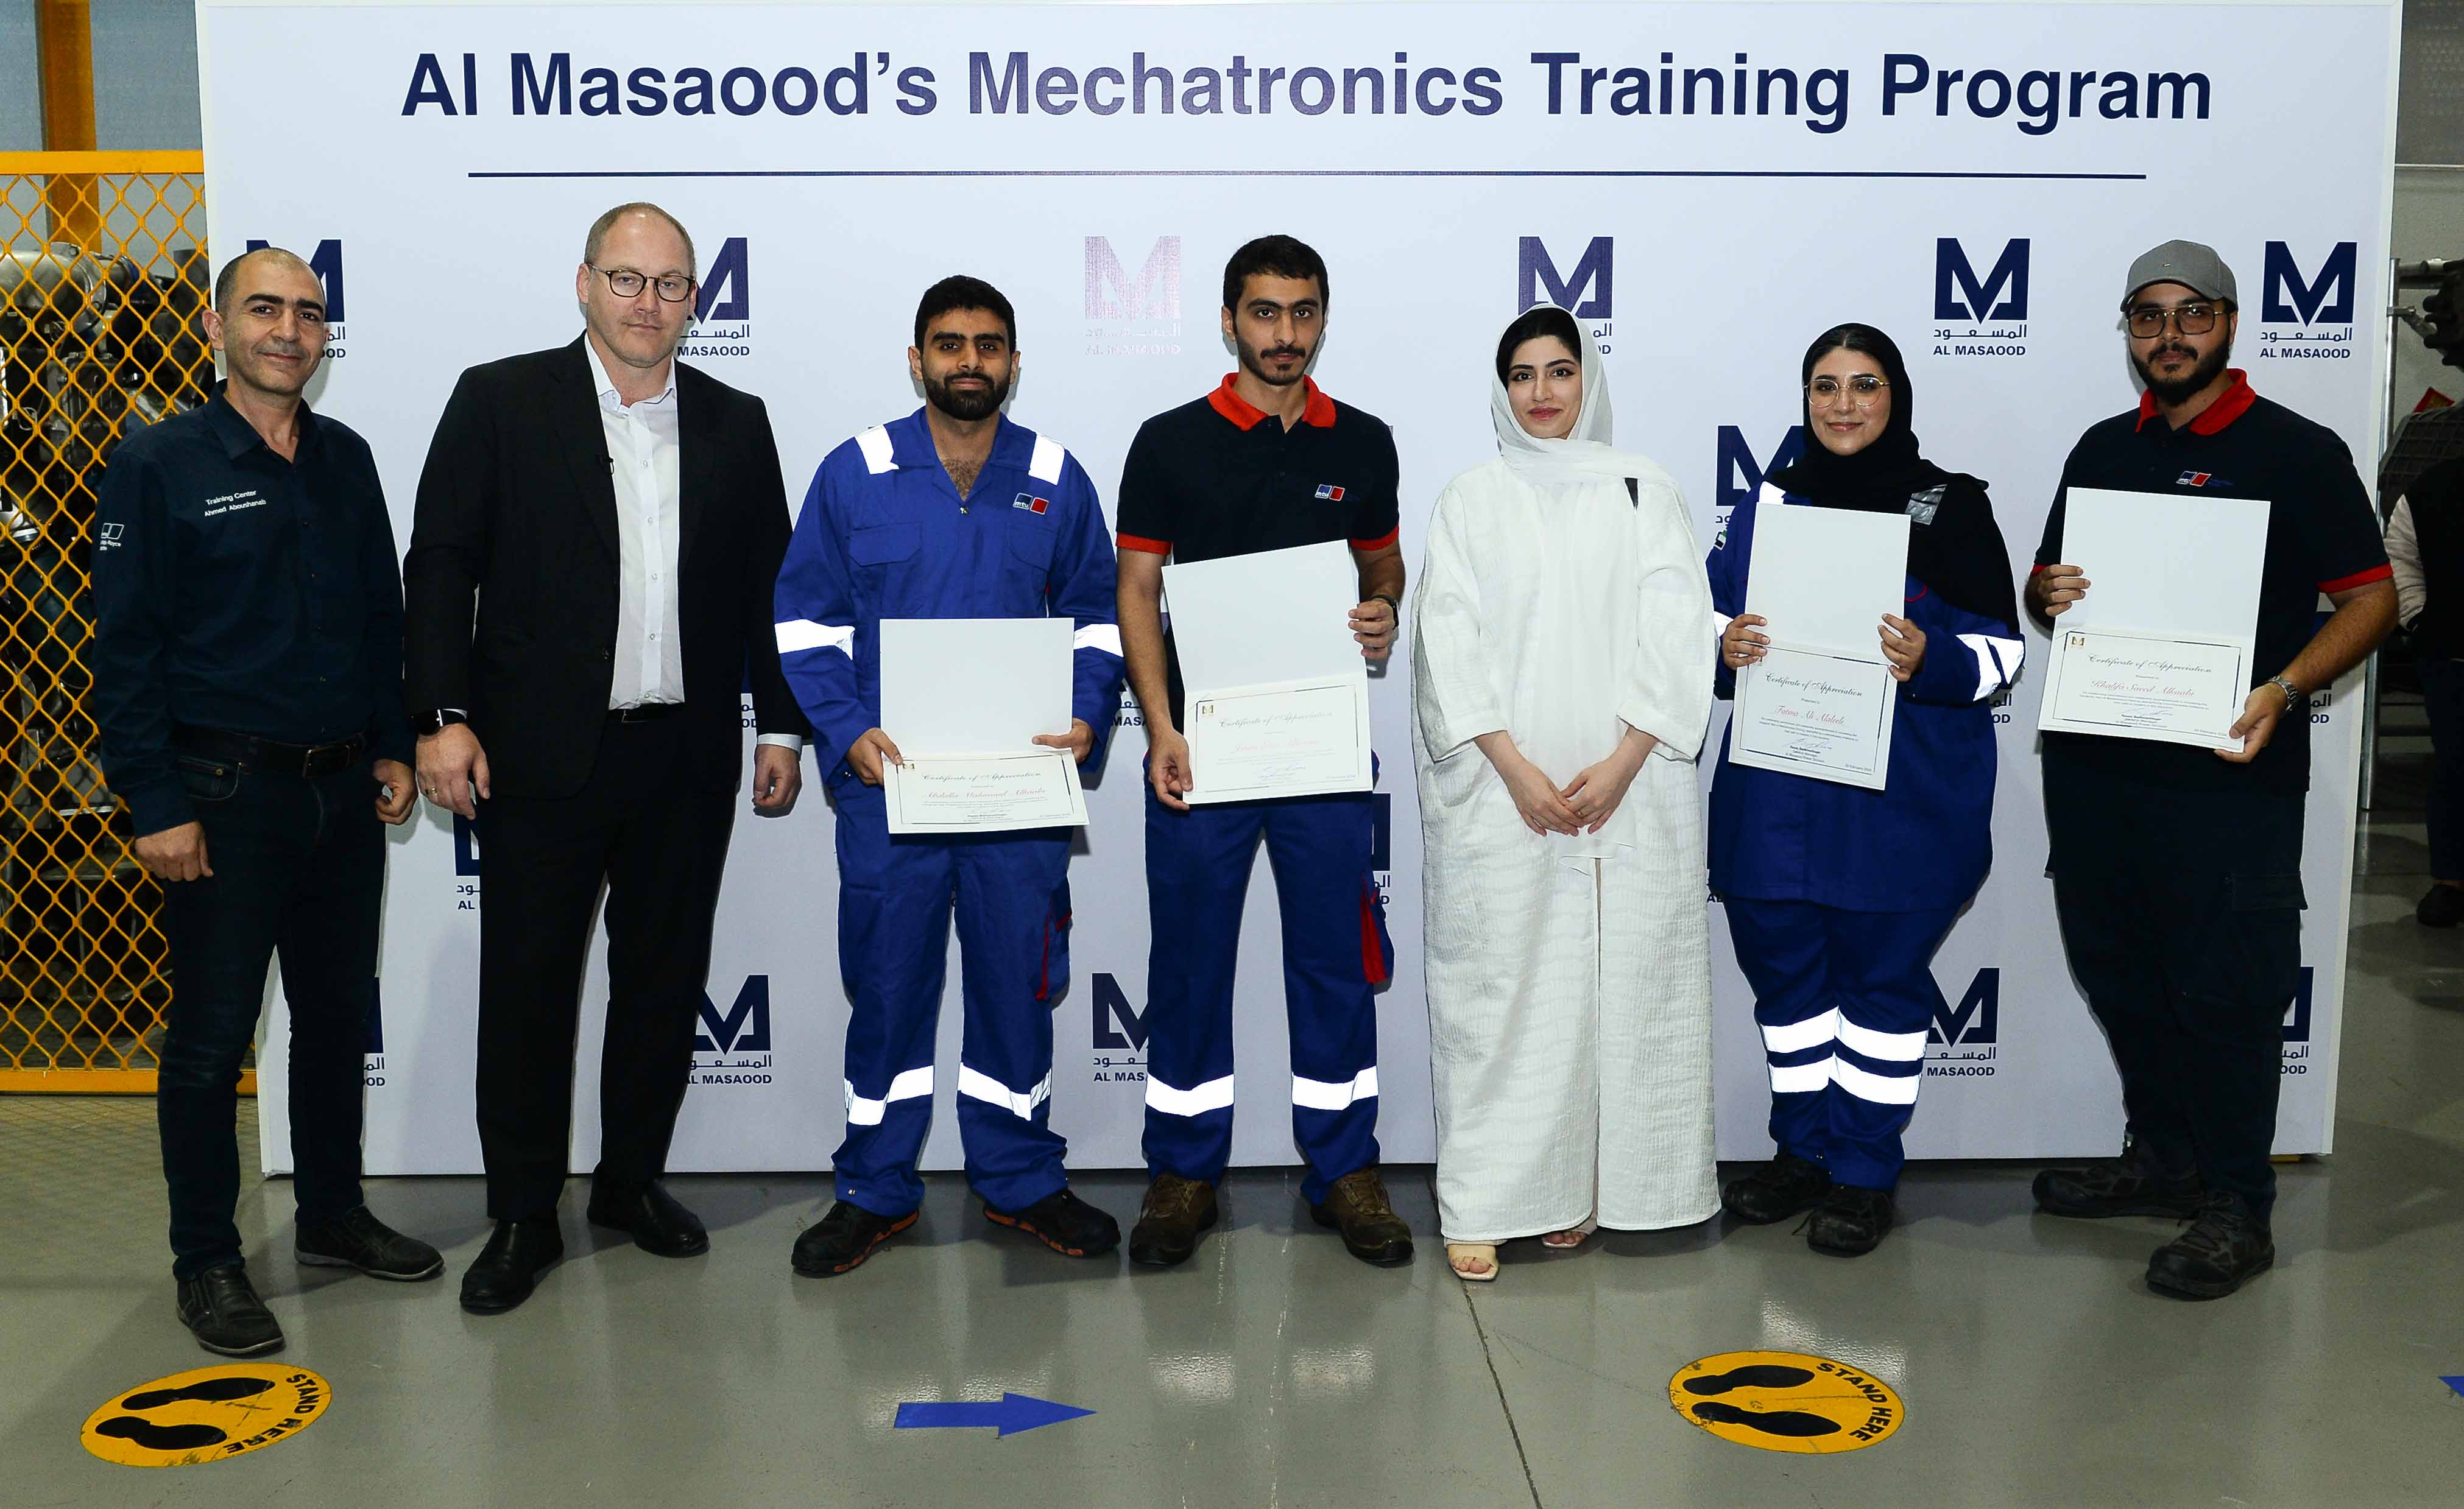 Empowering Emirati Youth: One Year of Growth with Al Masaood Power Division’s Mechatronics Apprenticeship Program